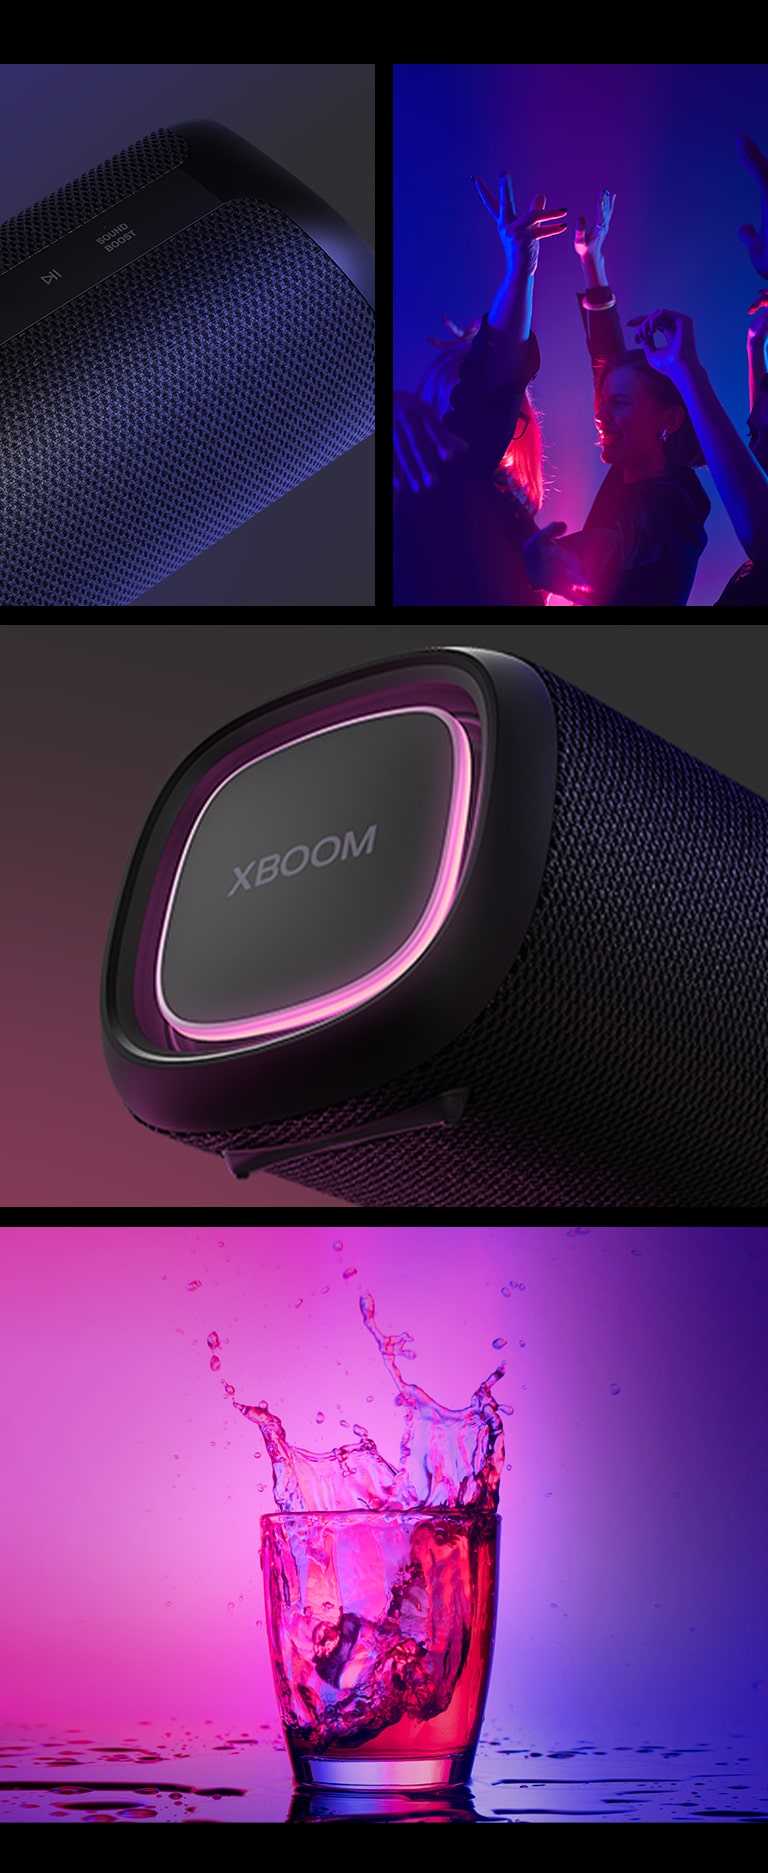 College. From left, close up view of LG XBOOM Go XG5. Next, an image of people enjoying the music. On the right from top to bottom: close-up view of the speaker with pink lighting and two glasses of drink.